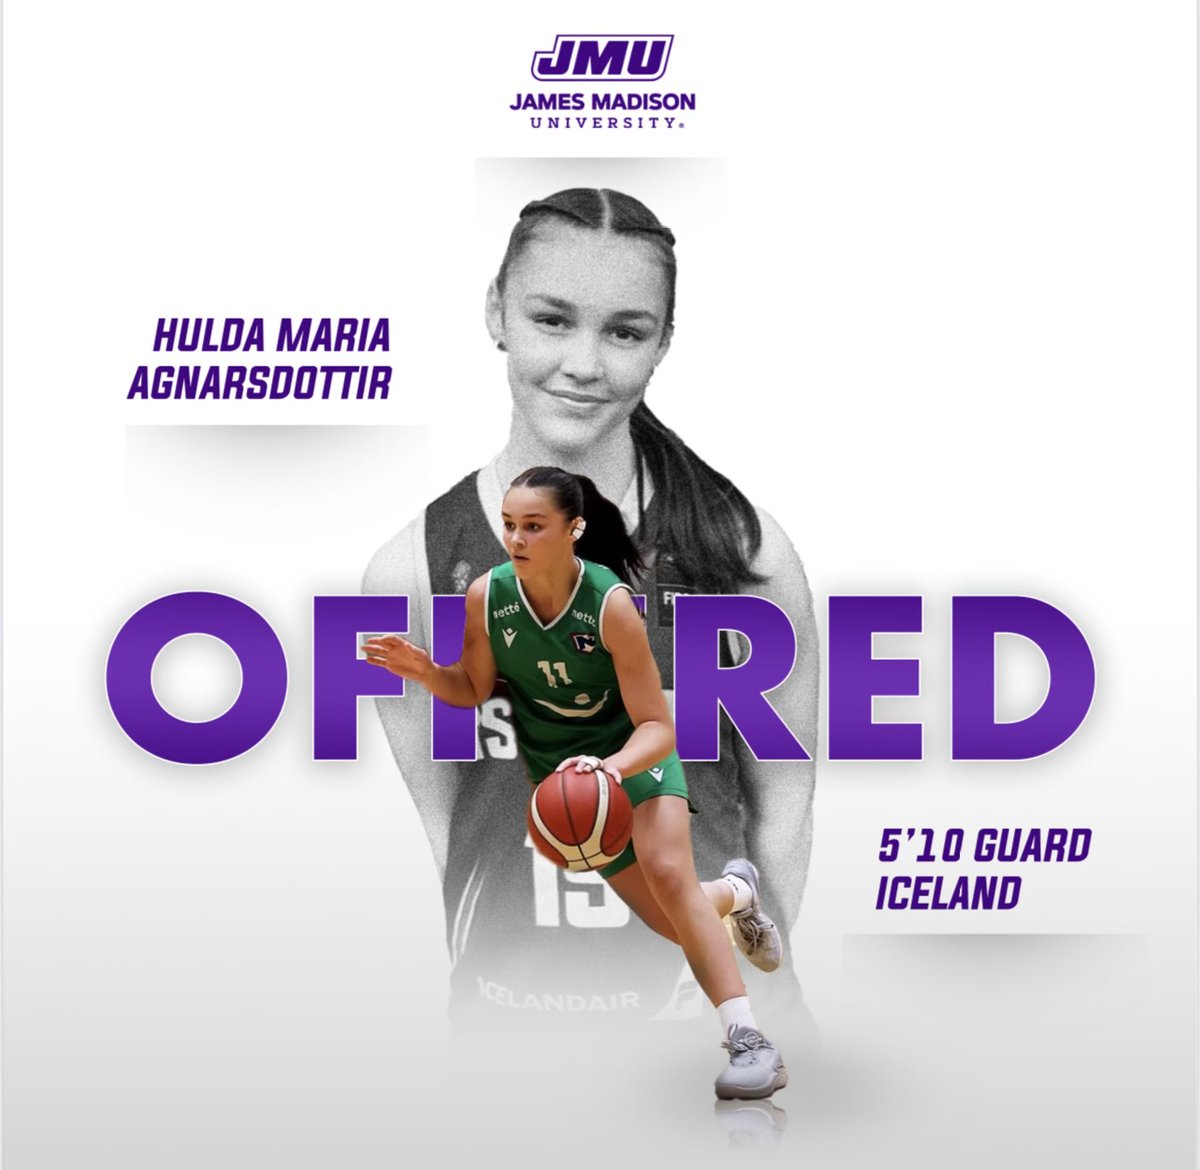 Proud and honoured to have these 2 offers on the same day 💚 Thank you @JMU and @UtahStateAlumni Work hard and dreams will come true 💚 @college_agency @exoduseurope @YohannaAraya